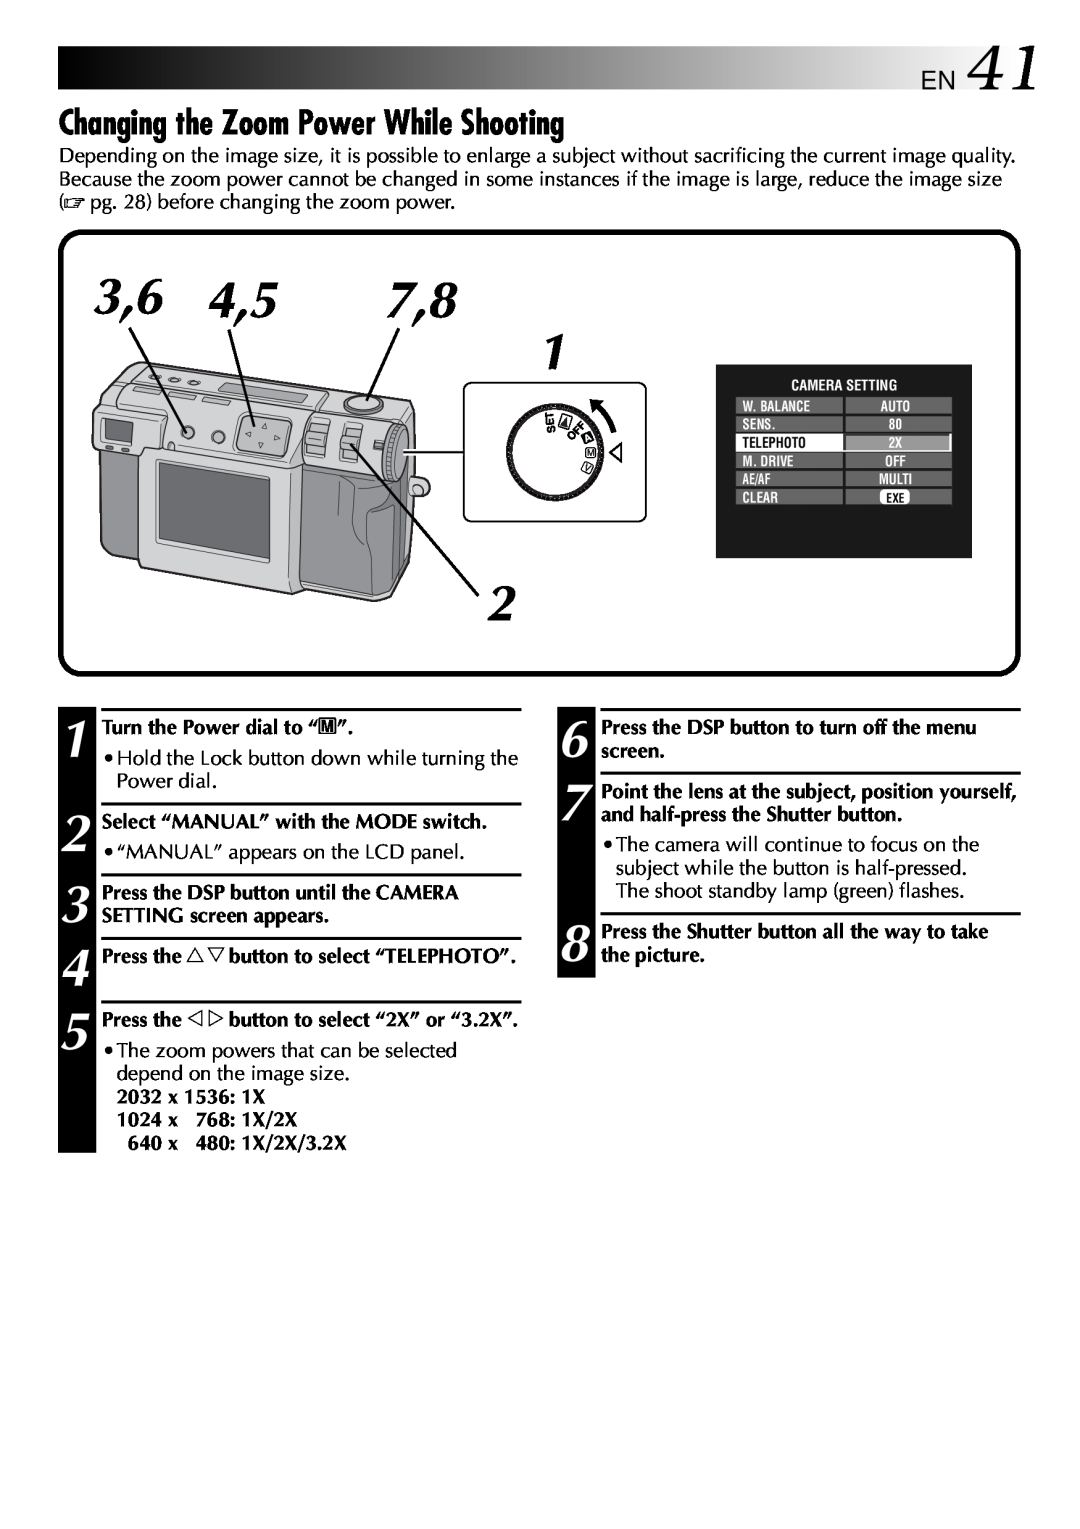 JVC GC-QX3 manual Changing the Zoom Power While Shooting, EN41, Press the DSP button to turn off the menu screen 